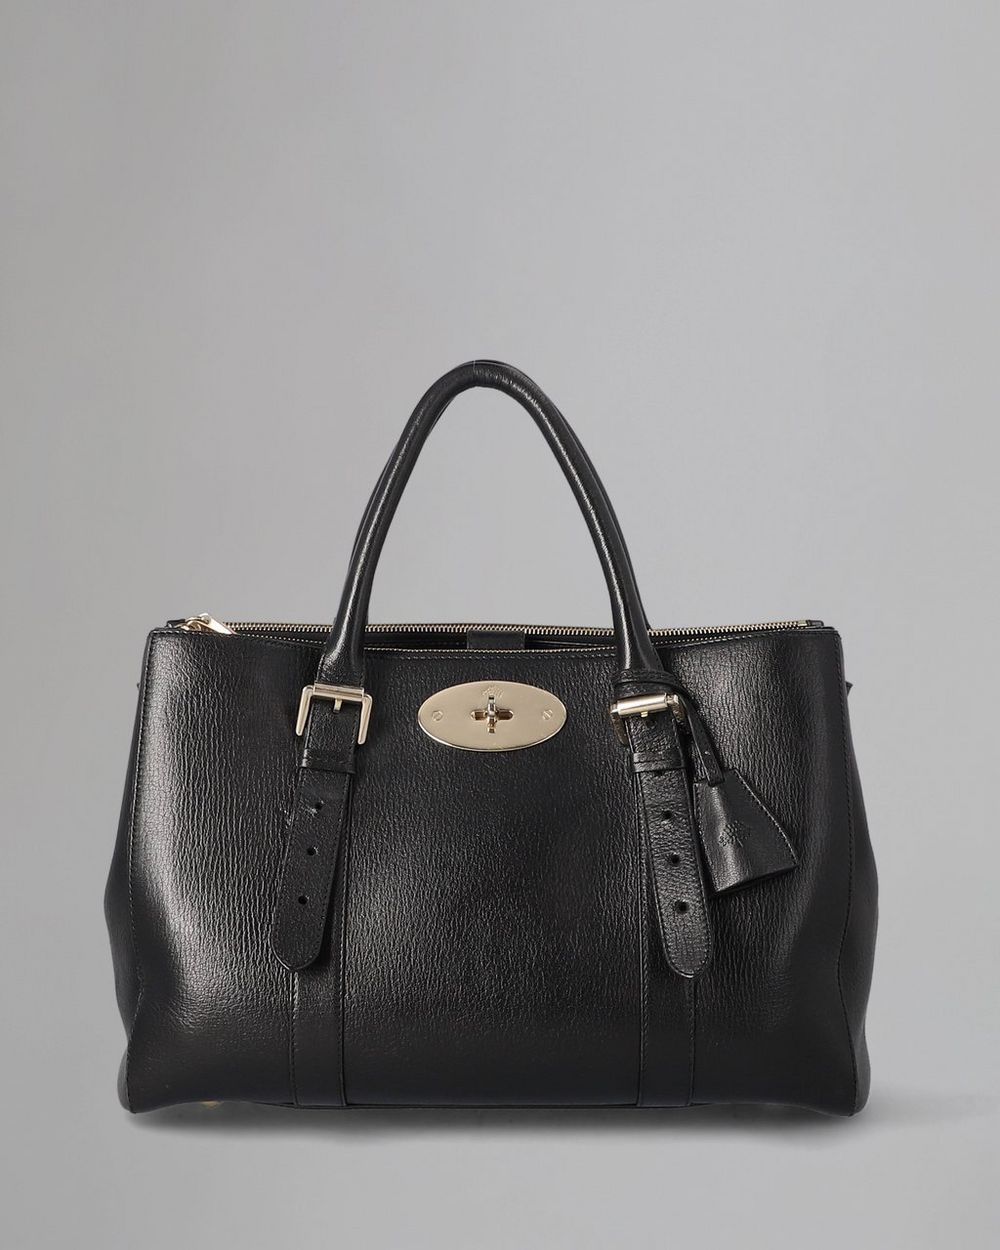 Mulberry Bayswater Large Double Zip Tote in Black Shiny Goat Leather - SOLD